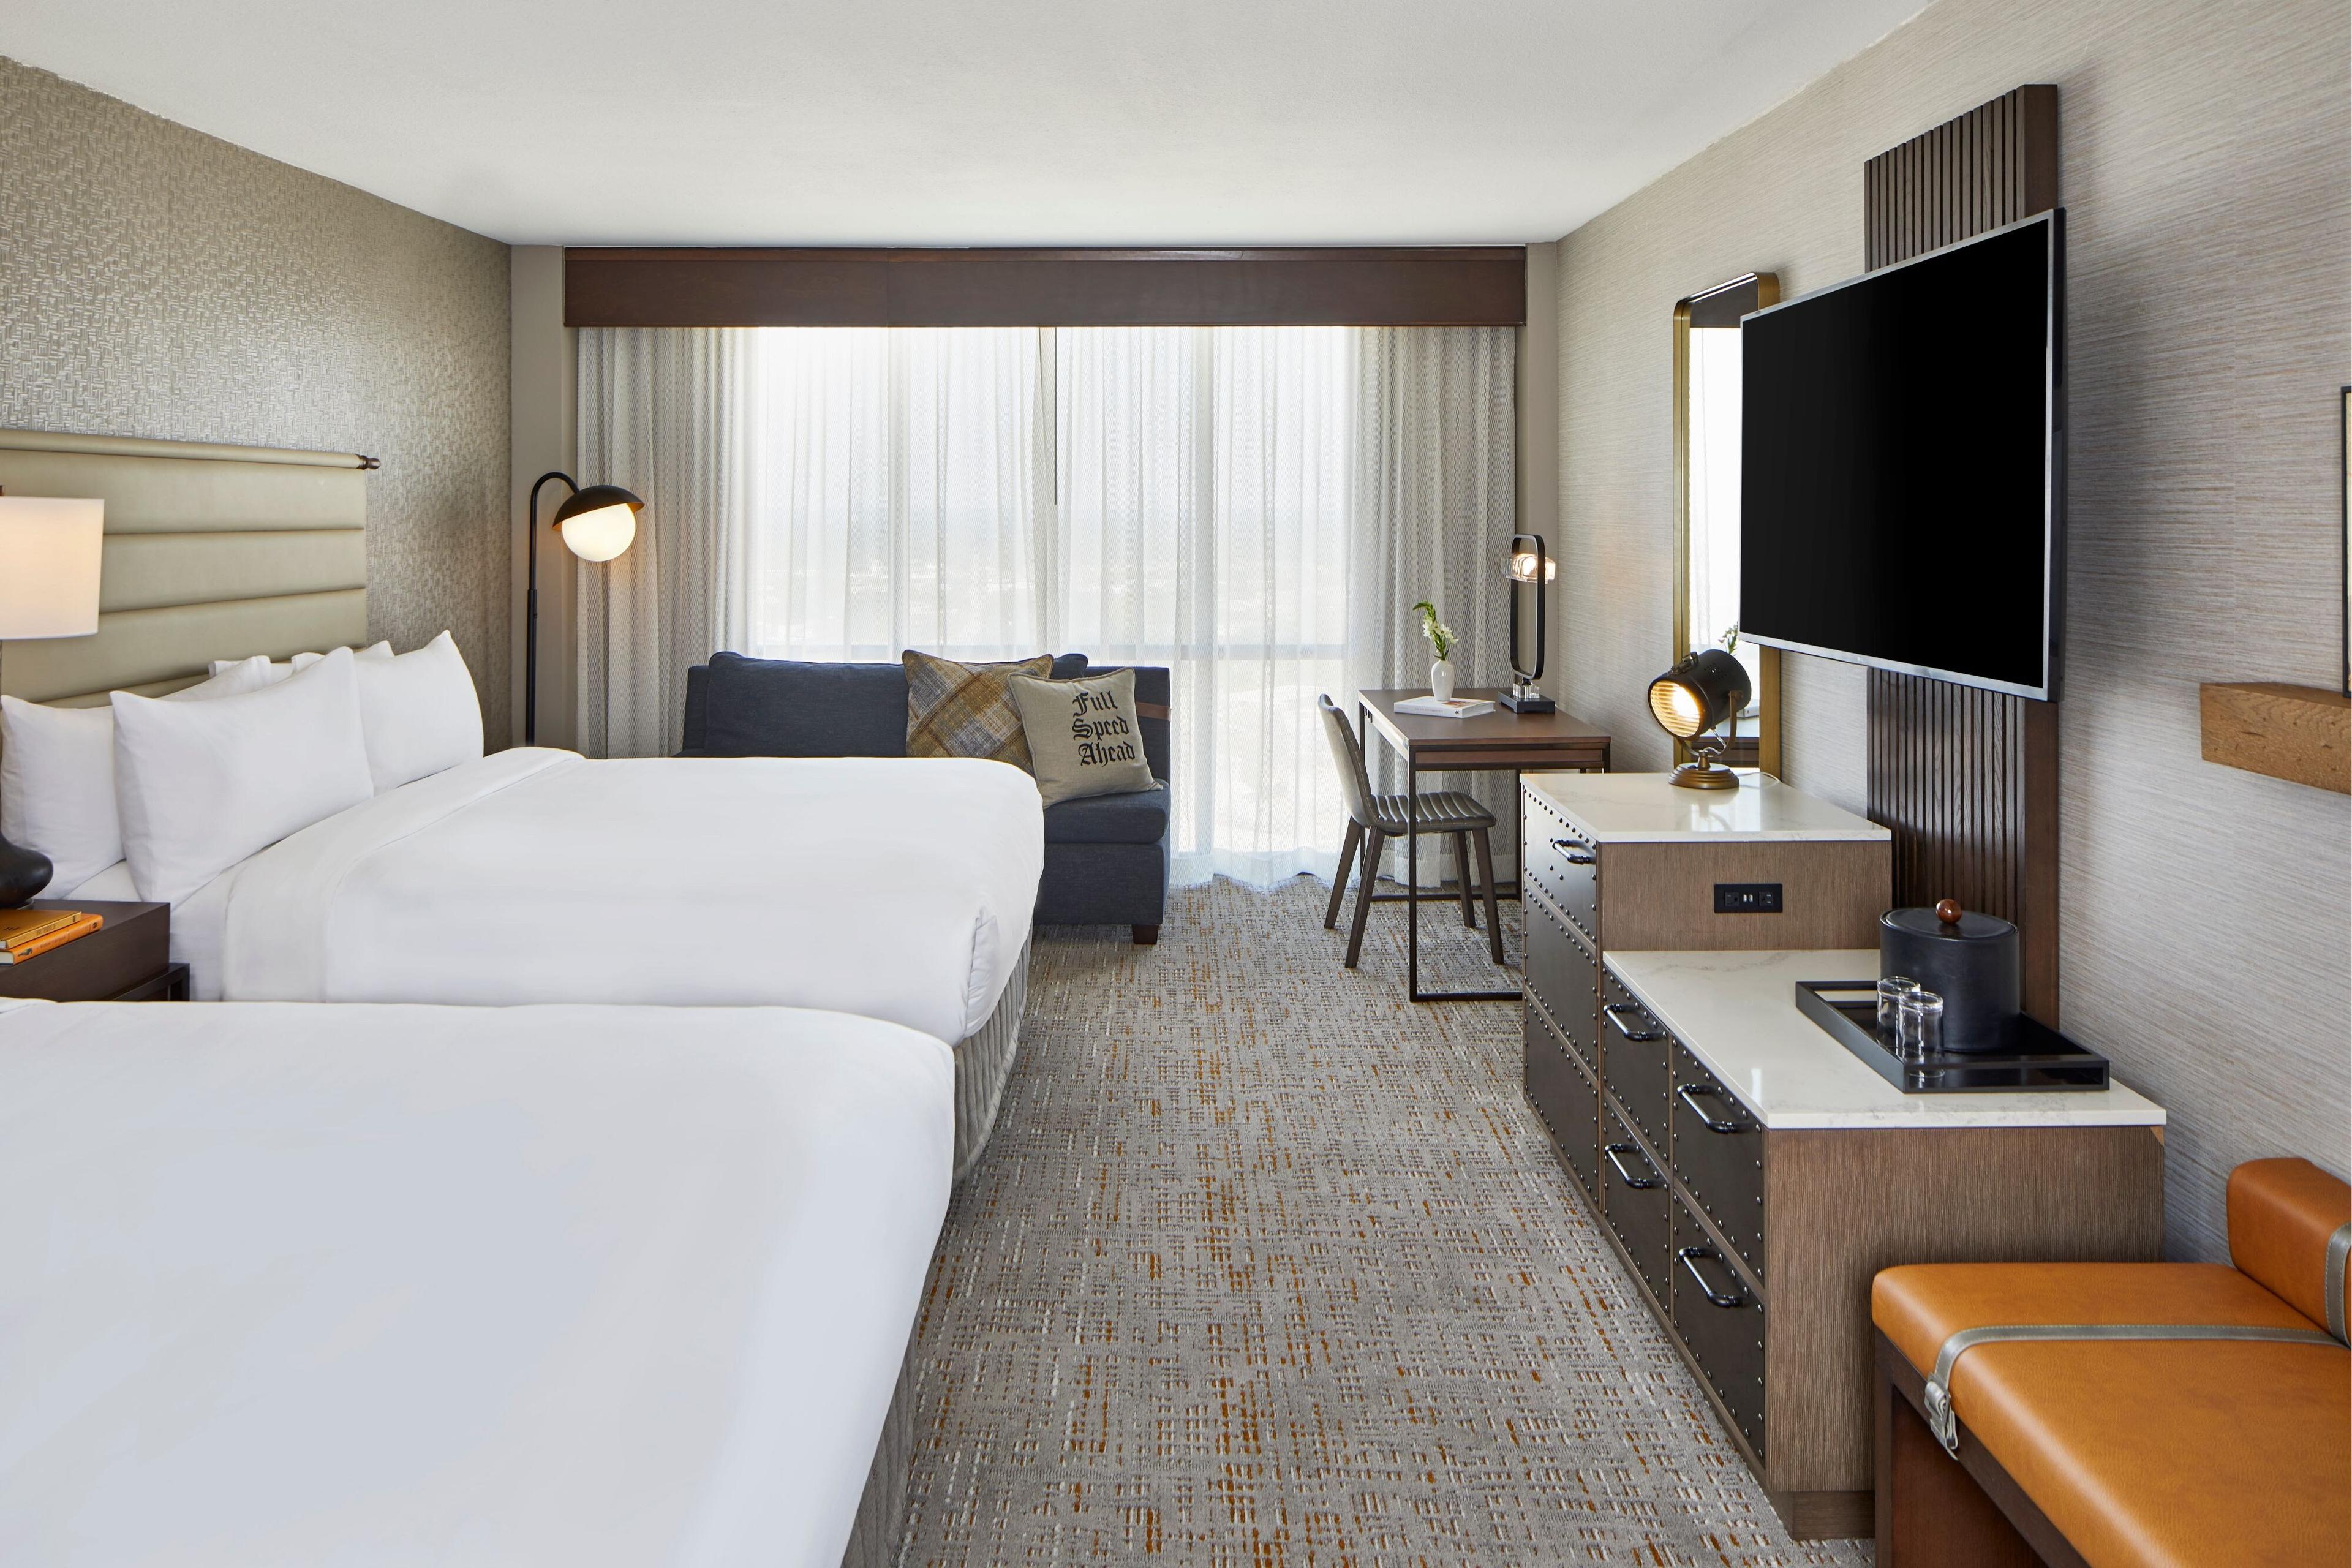 Our guest rooms with two queen beds offer flat-panel TVs with premium cable and movie channels, work desks and connectivity panels for your electronics.